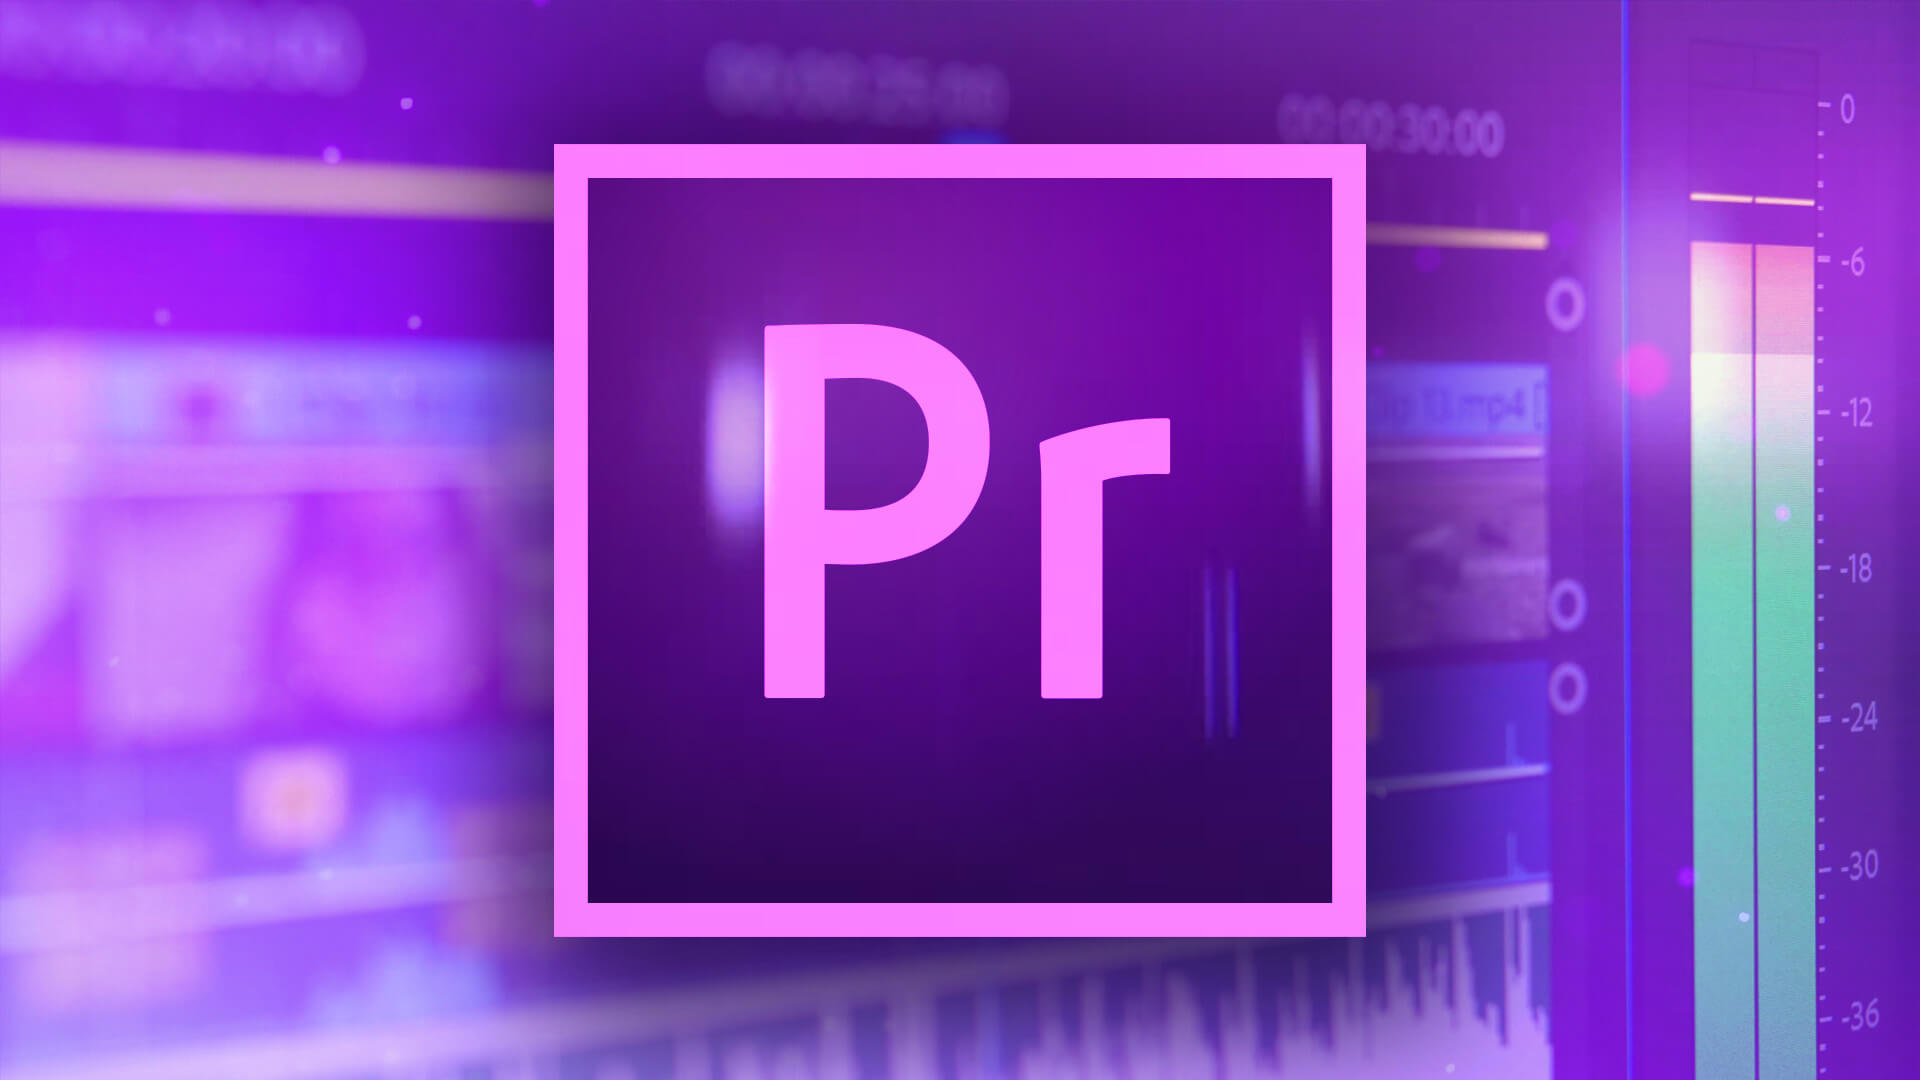 Video Editing With Adobe Premiere Pro 2018 For Beginners - Adobe Premiere Pro 2018 , HD Wallpaper & Backgrounds